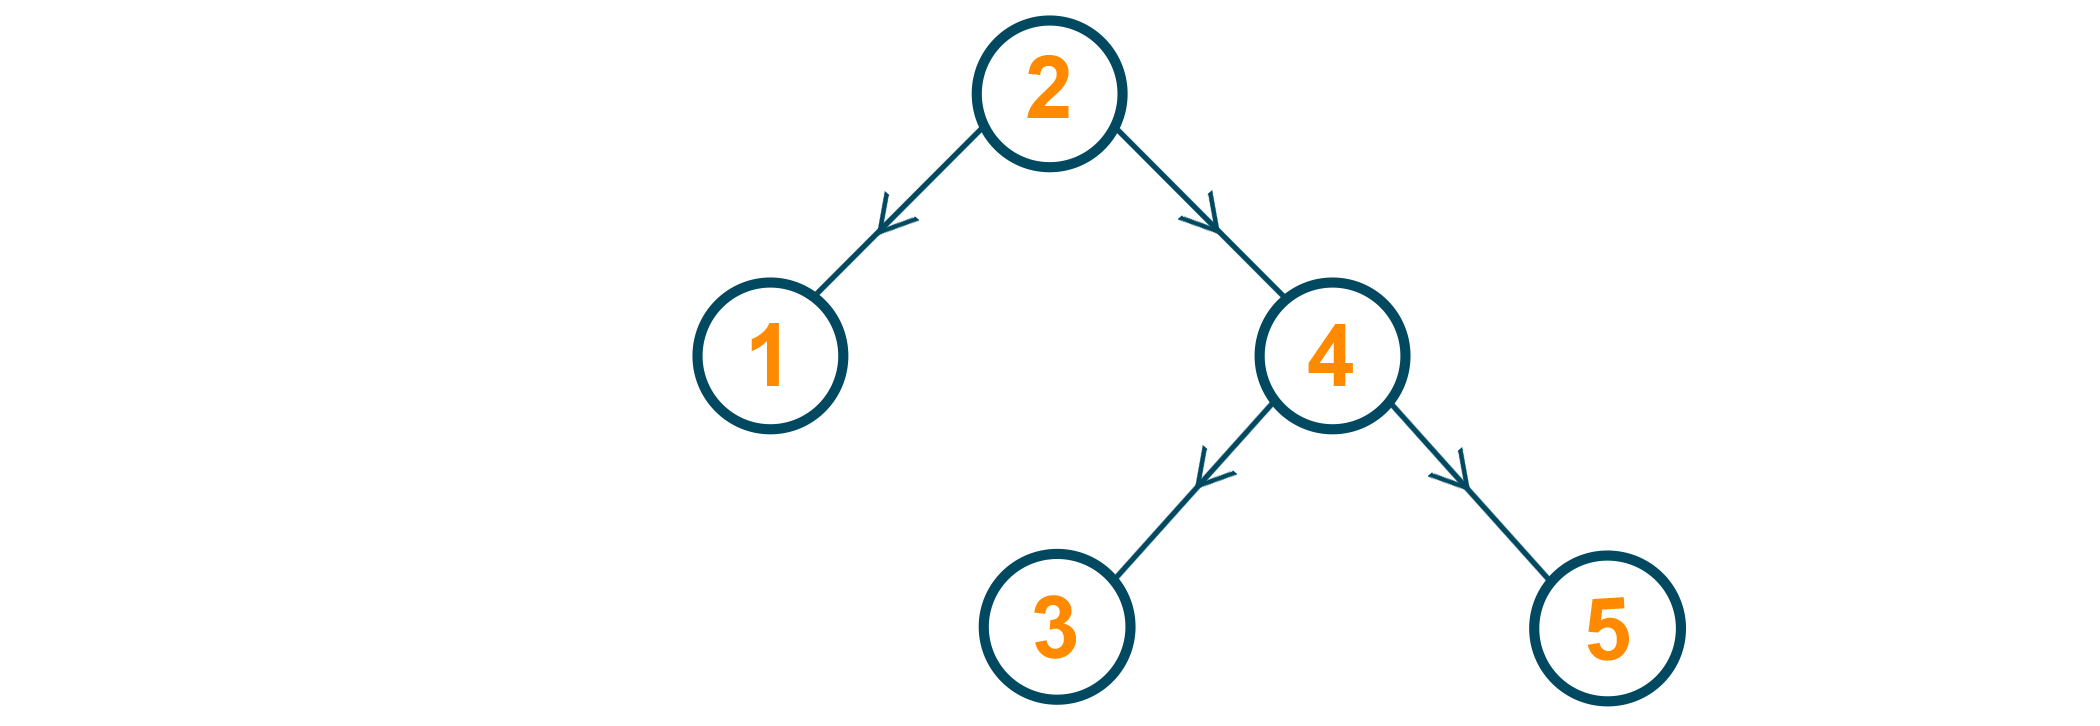 Node 5 is inserted as the right child for Node 4